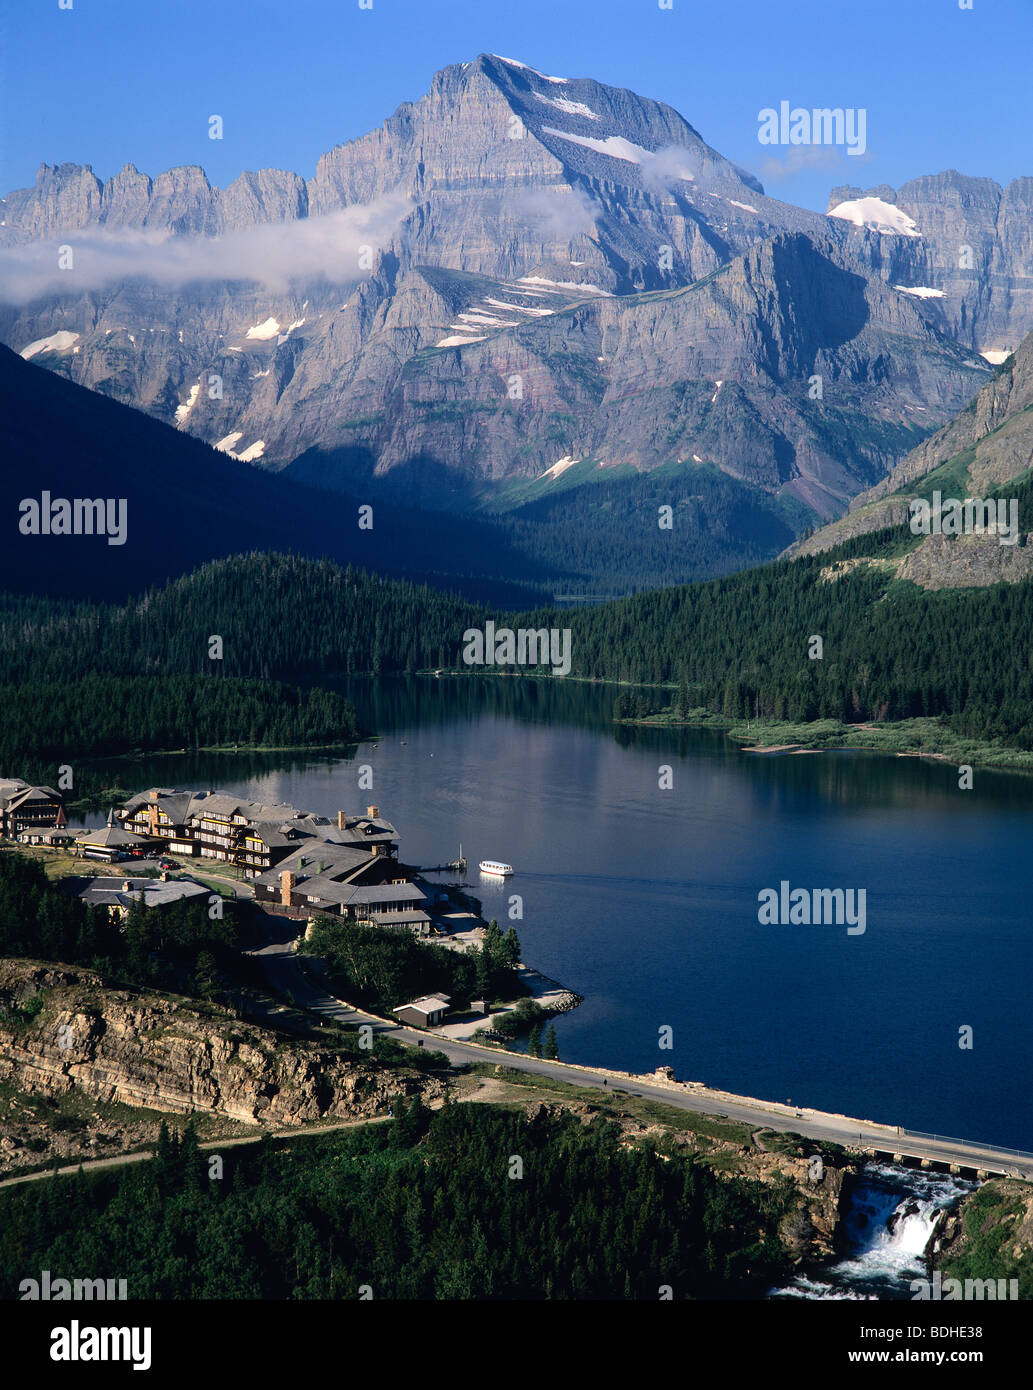 Overview of lake and hotel, Glacier National Park, MT Stock Photo